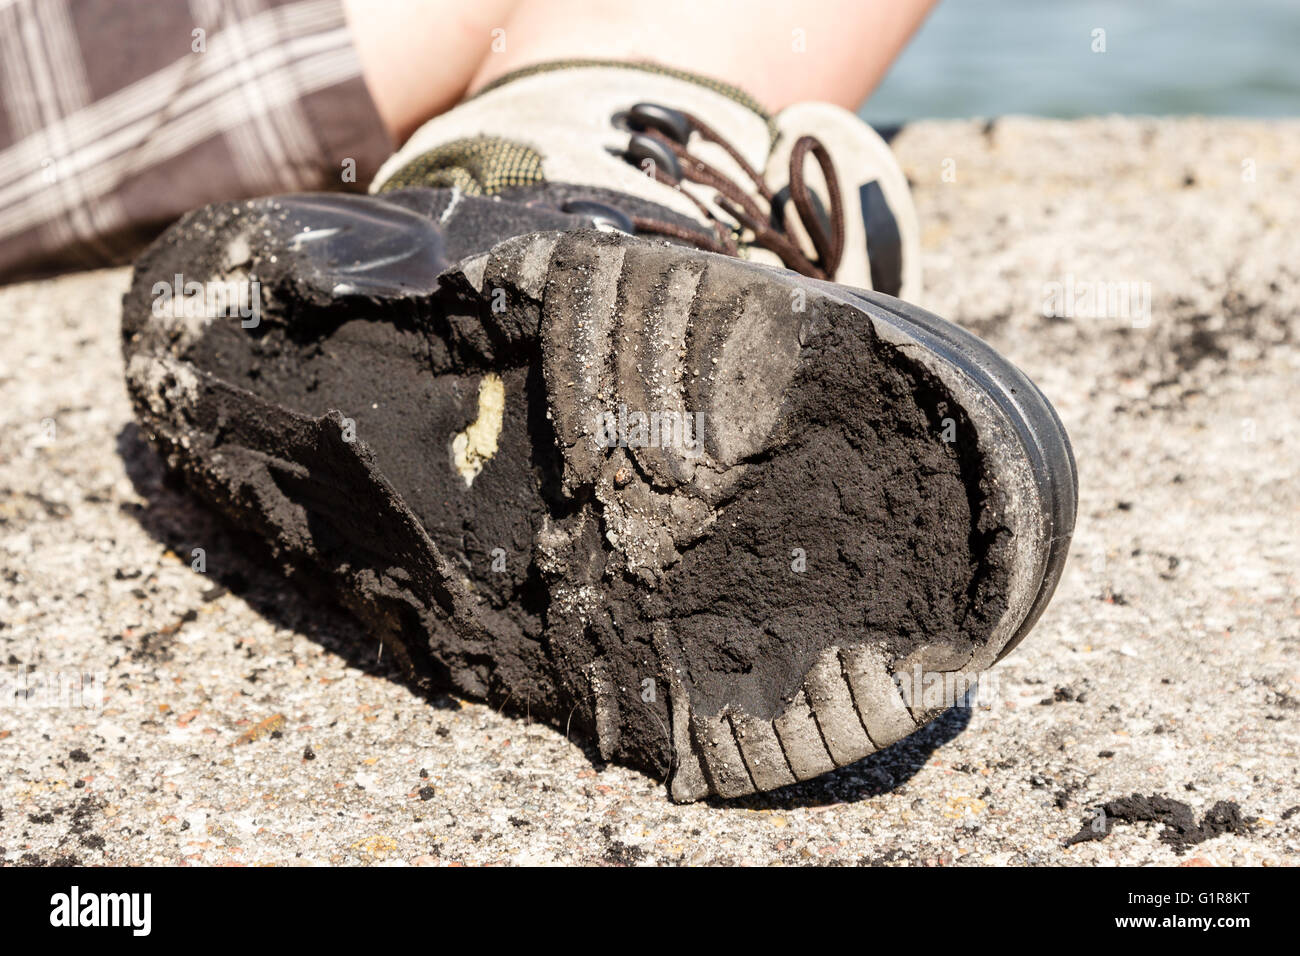 Outdoor trip holidays relax footwear concept. Checking on worn out shoe. Person with destroyed old boot. Stock Photo